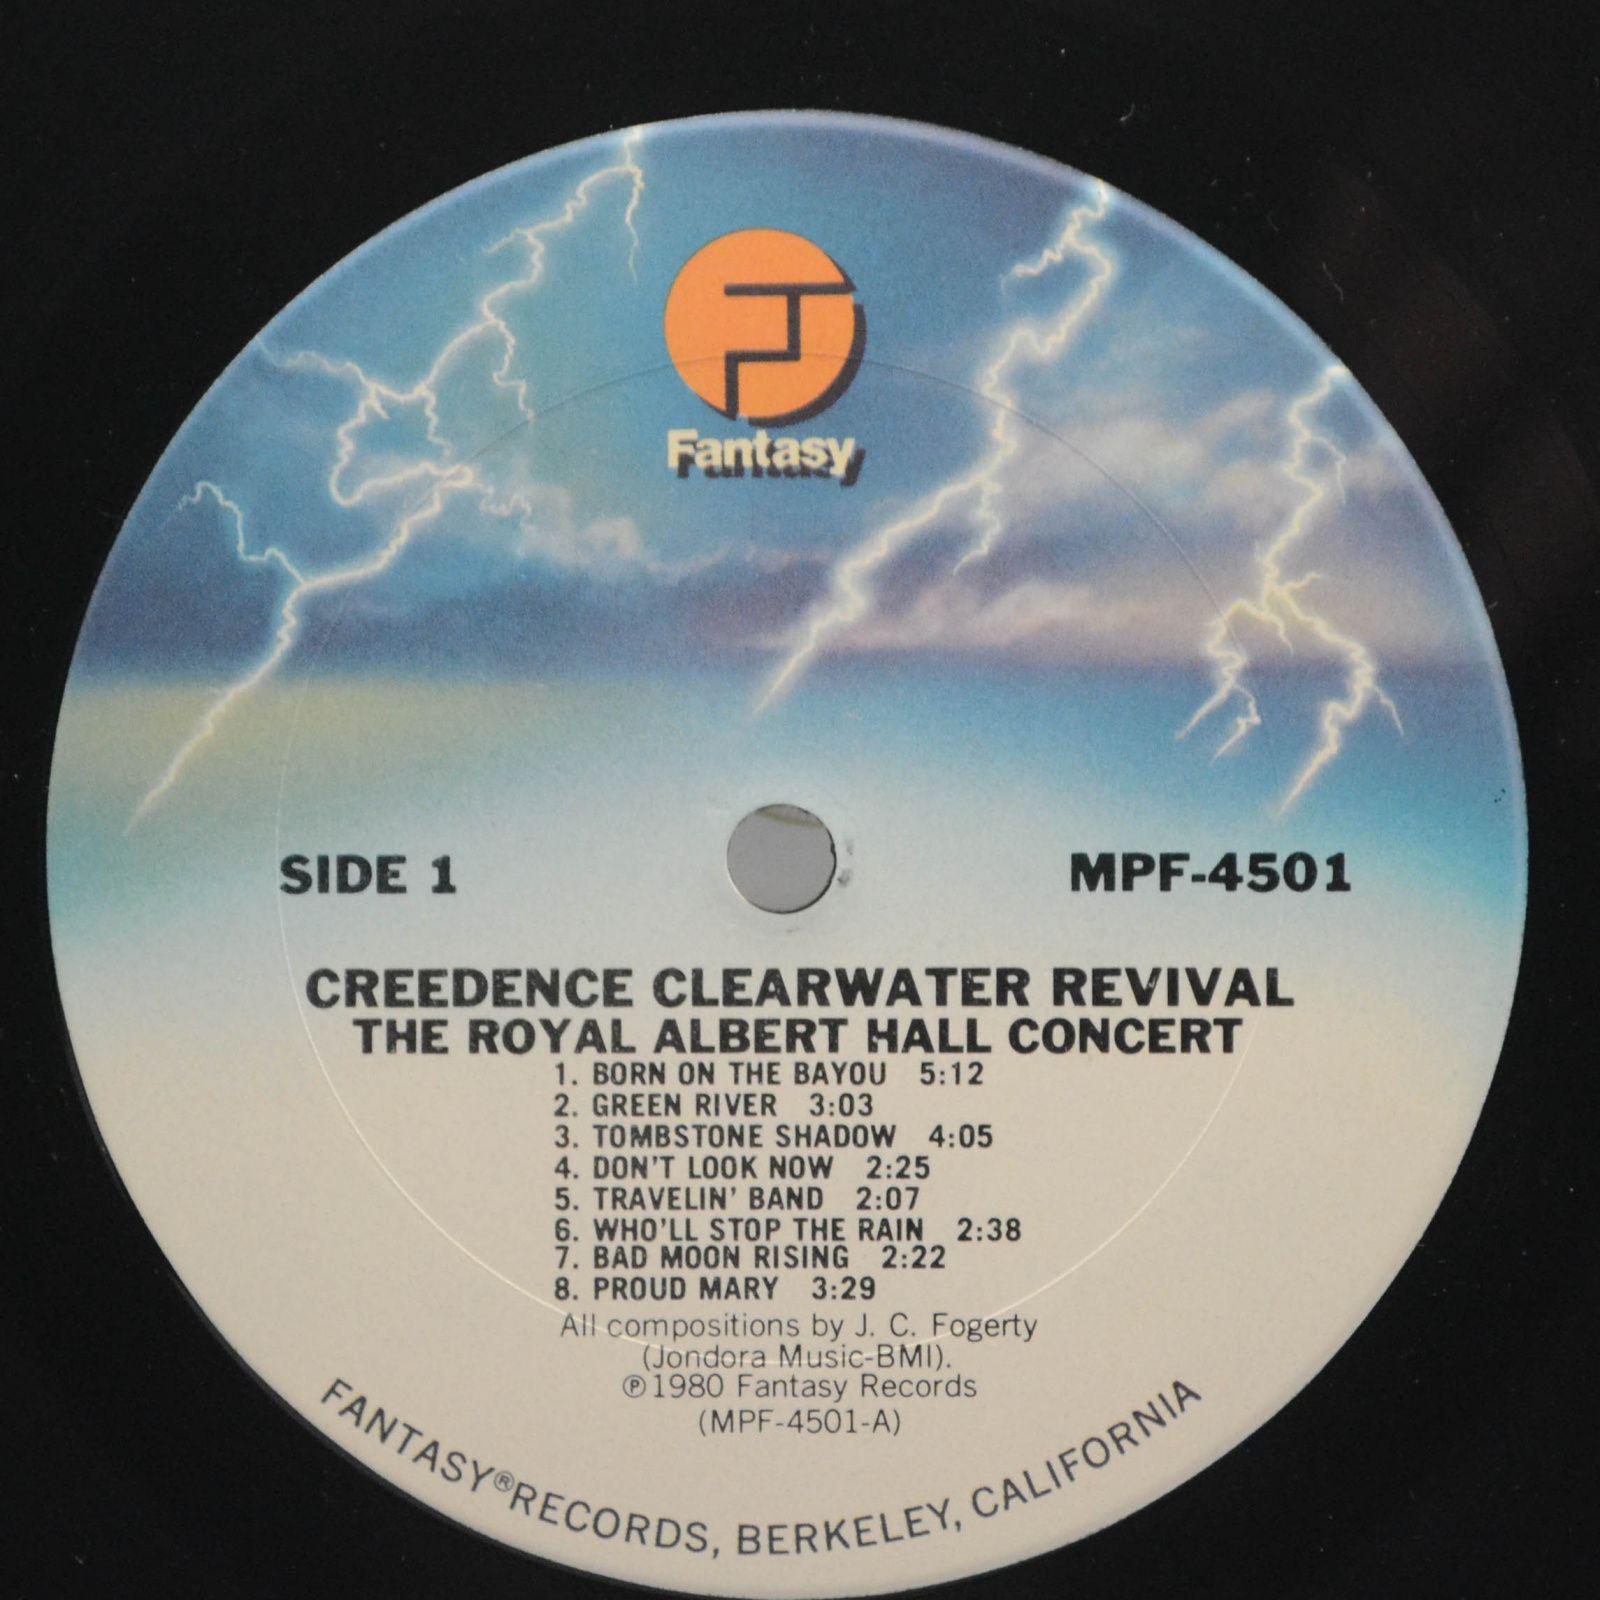 Creedence Clearwater Revival — The Royal Albert Hall Concert, 1980